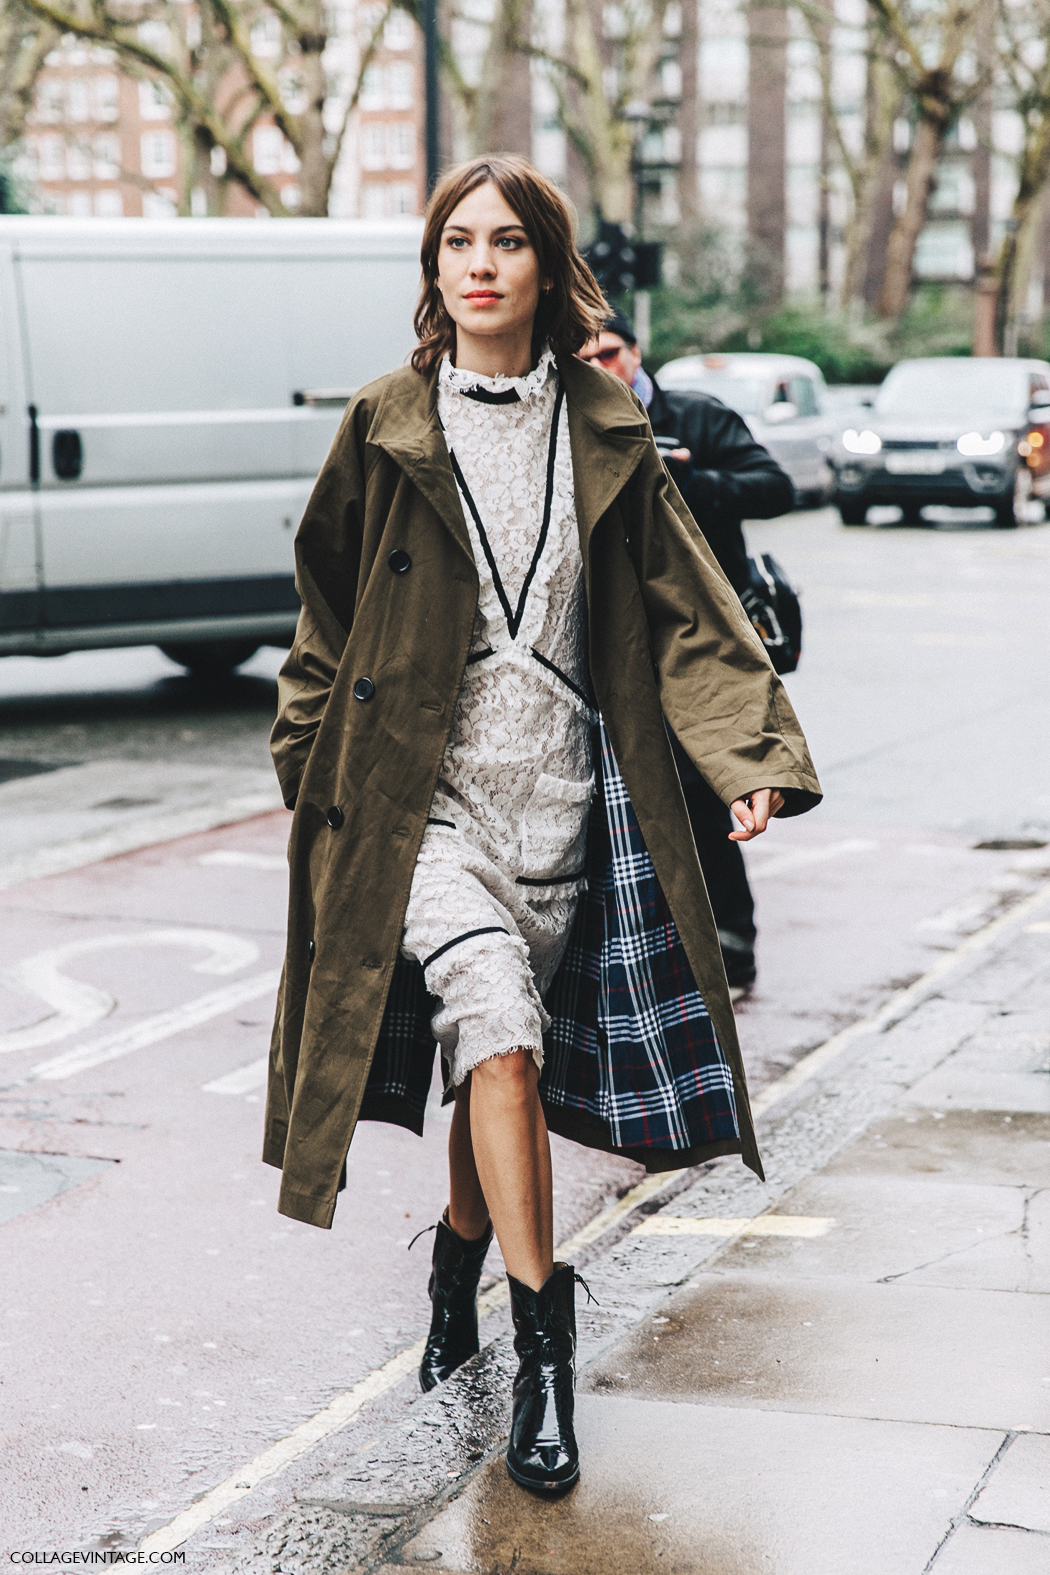 LFW-London_Fashion_Week_Fall_16-Street_Style-Collage_Vintage-Alexa_Chung-Trench_Coat-Cowboy_Boots-Erdem-Lace_Dress-4